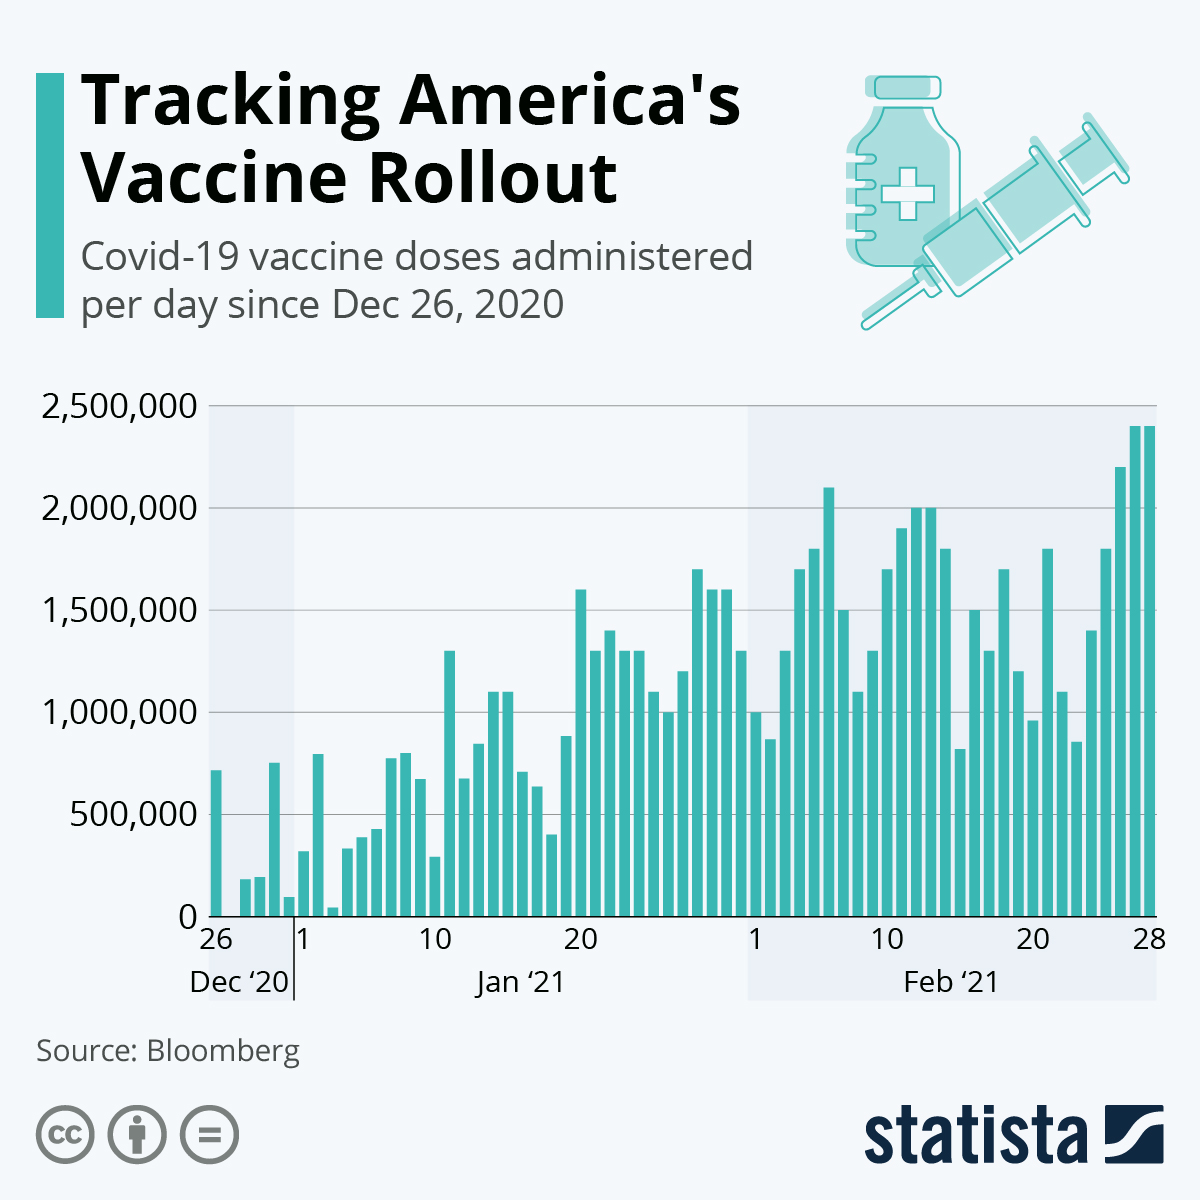 Tracking Americas Vaccine Rollout